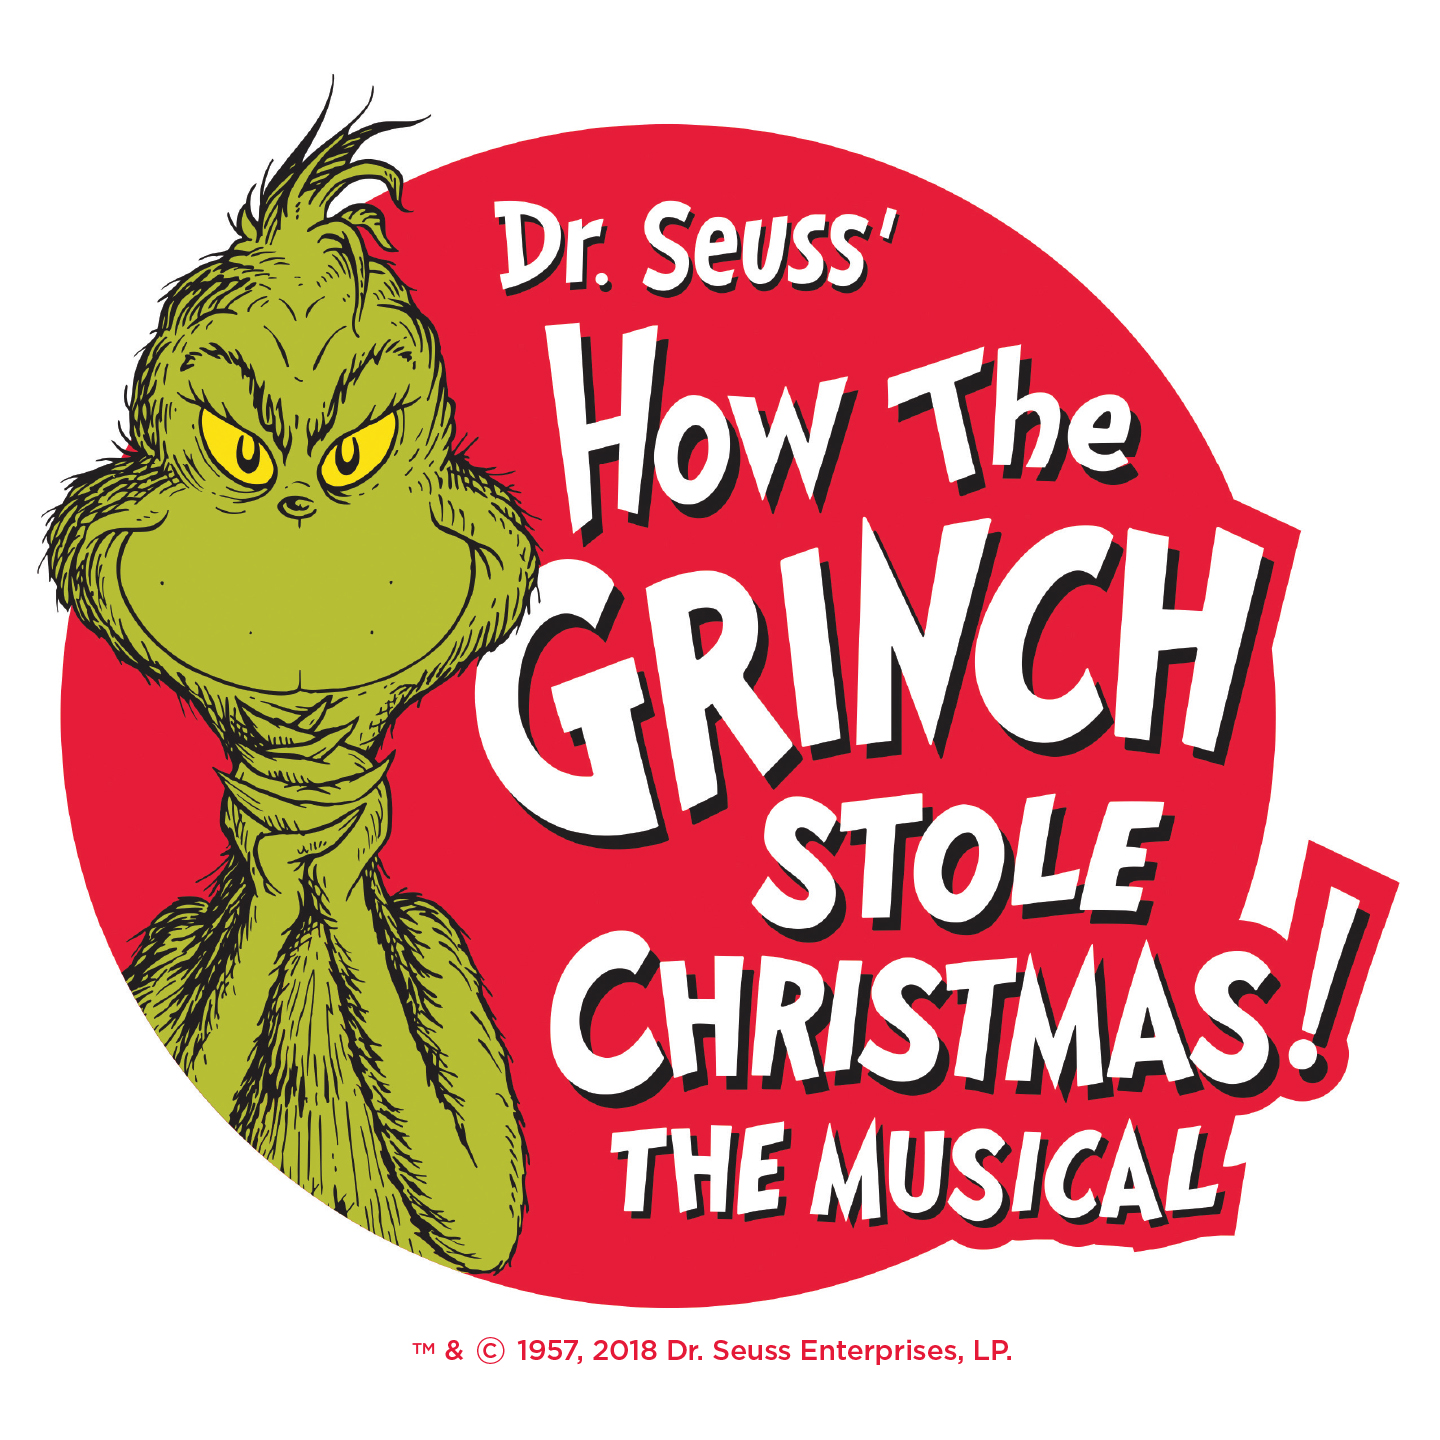 Want to win two tickets to see Dr Seuss’ How the Grinch Stole Christmas